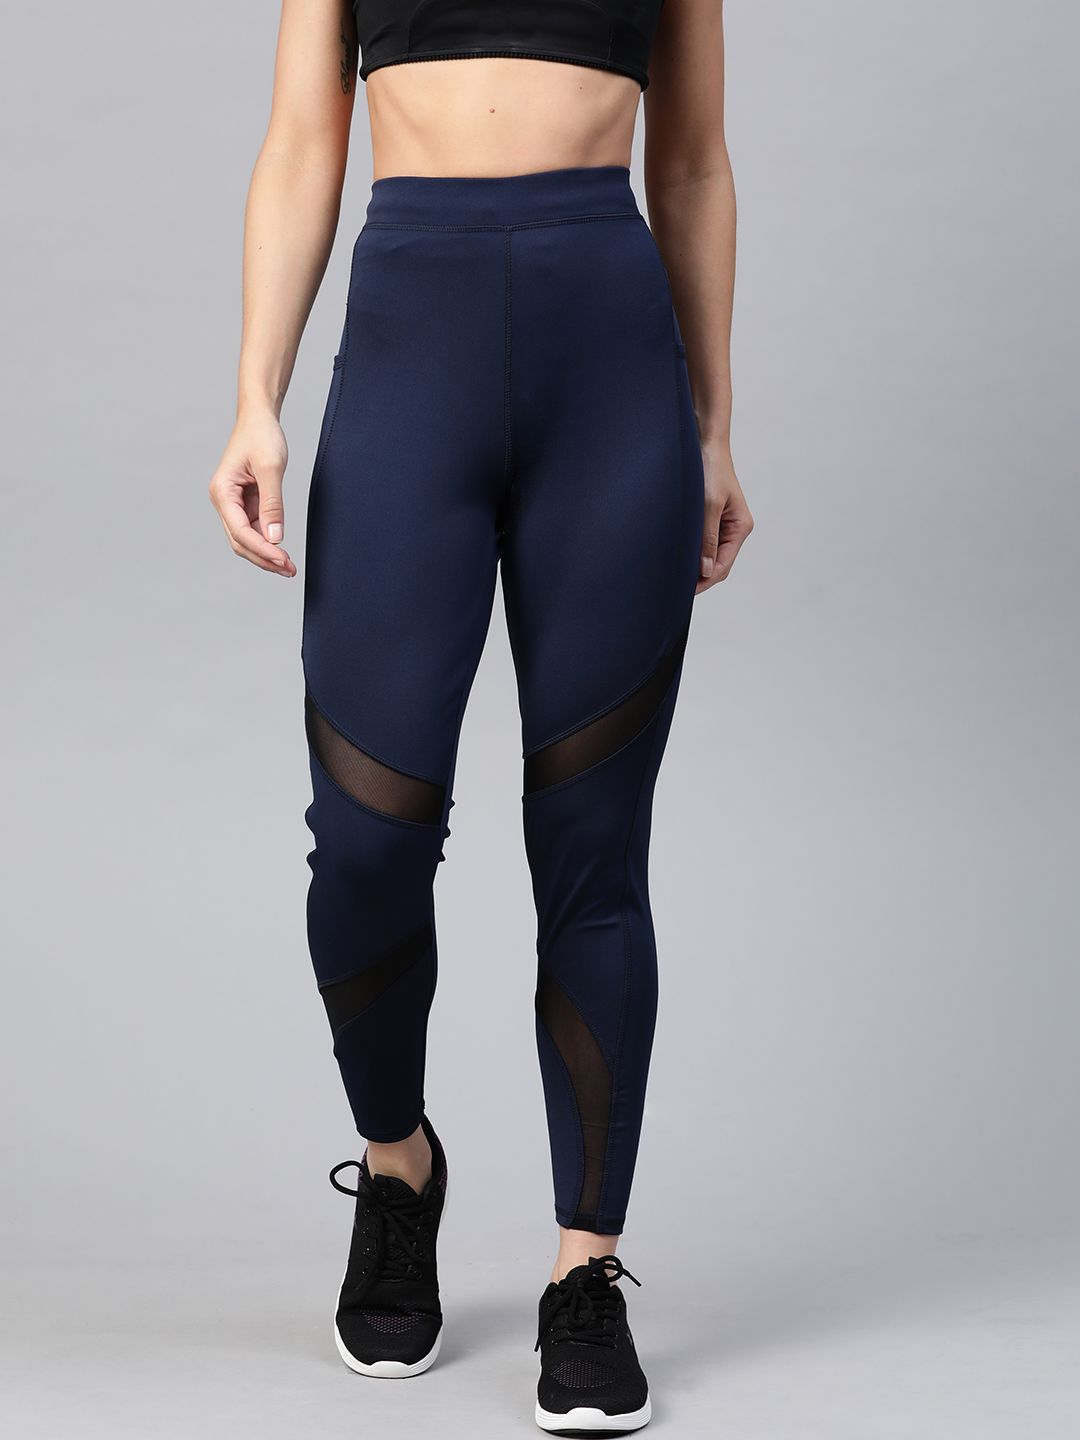 M7 by Metronaut Women Navy Blue High-Rise Solid Training Tights Price in India